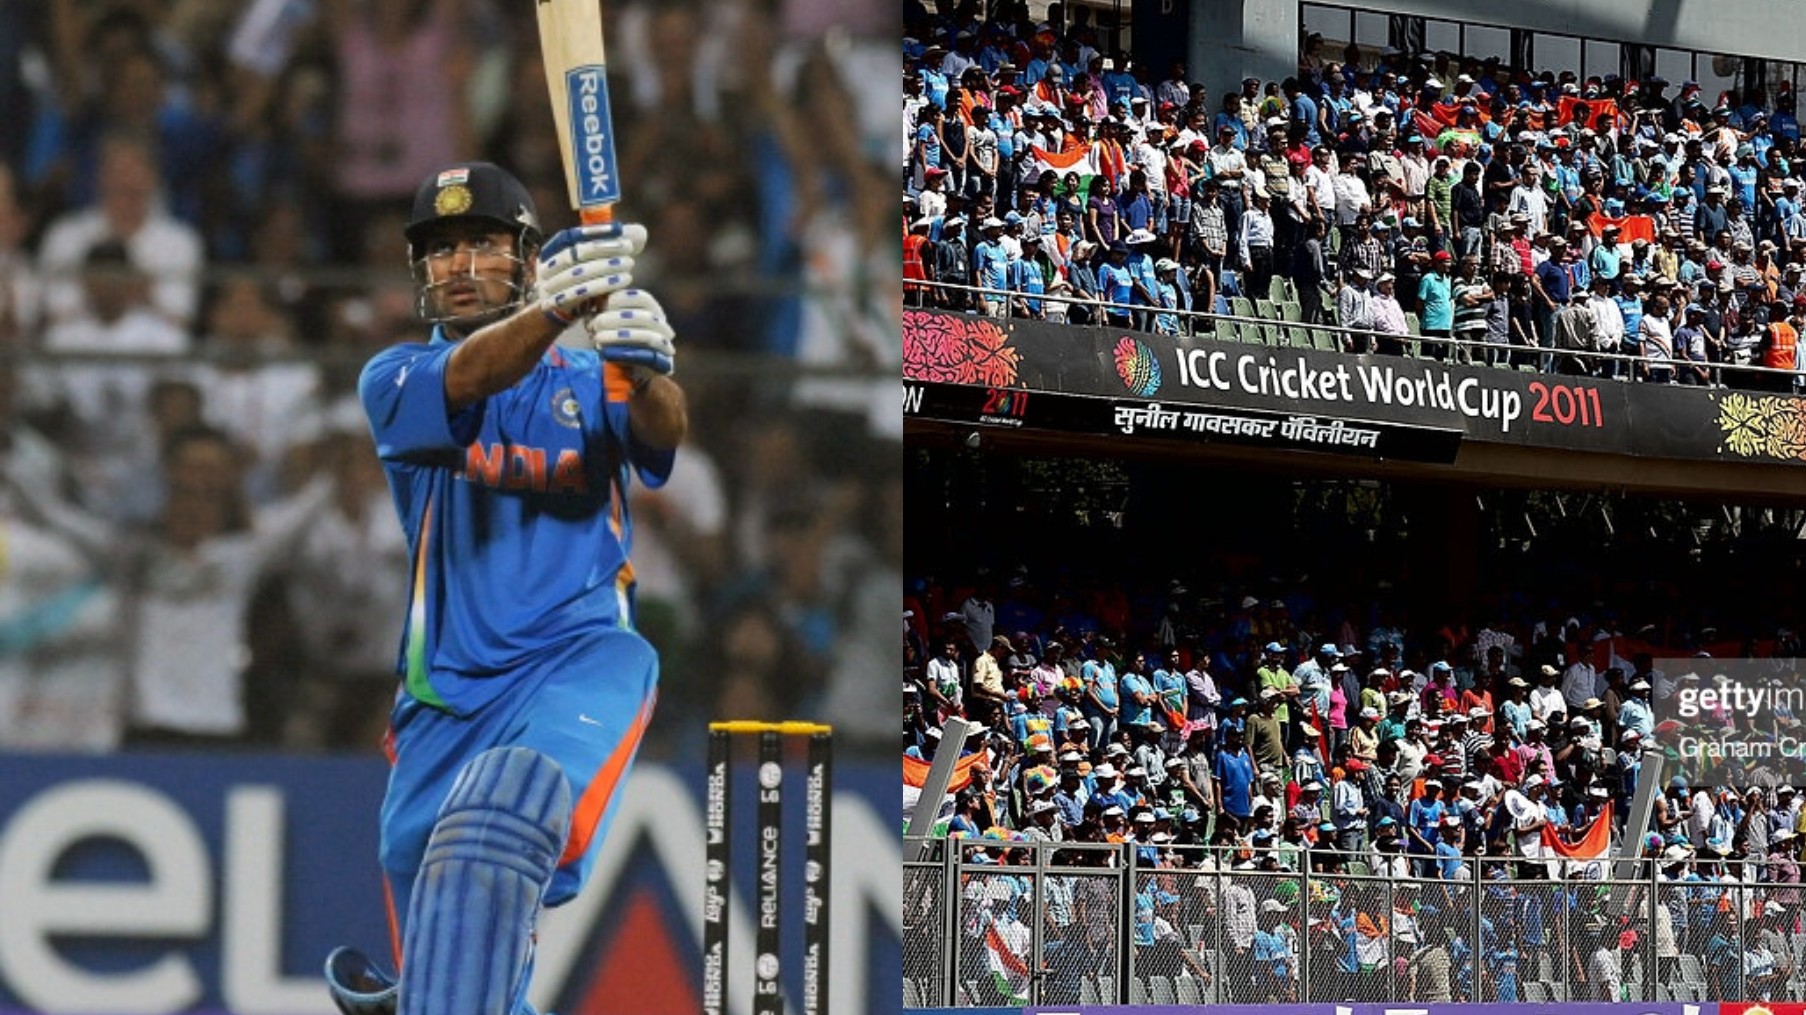 MCA proposes a permanent seat at the Wankhede stadium for MS Dhoni  